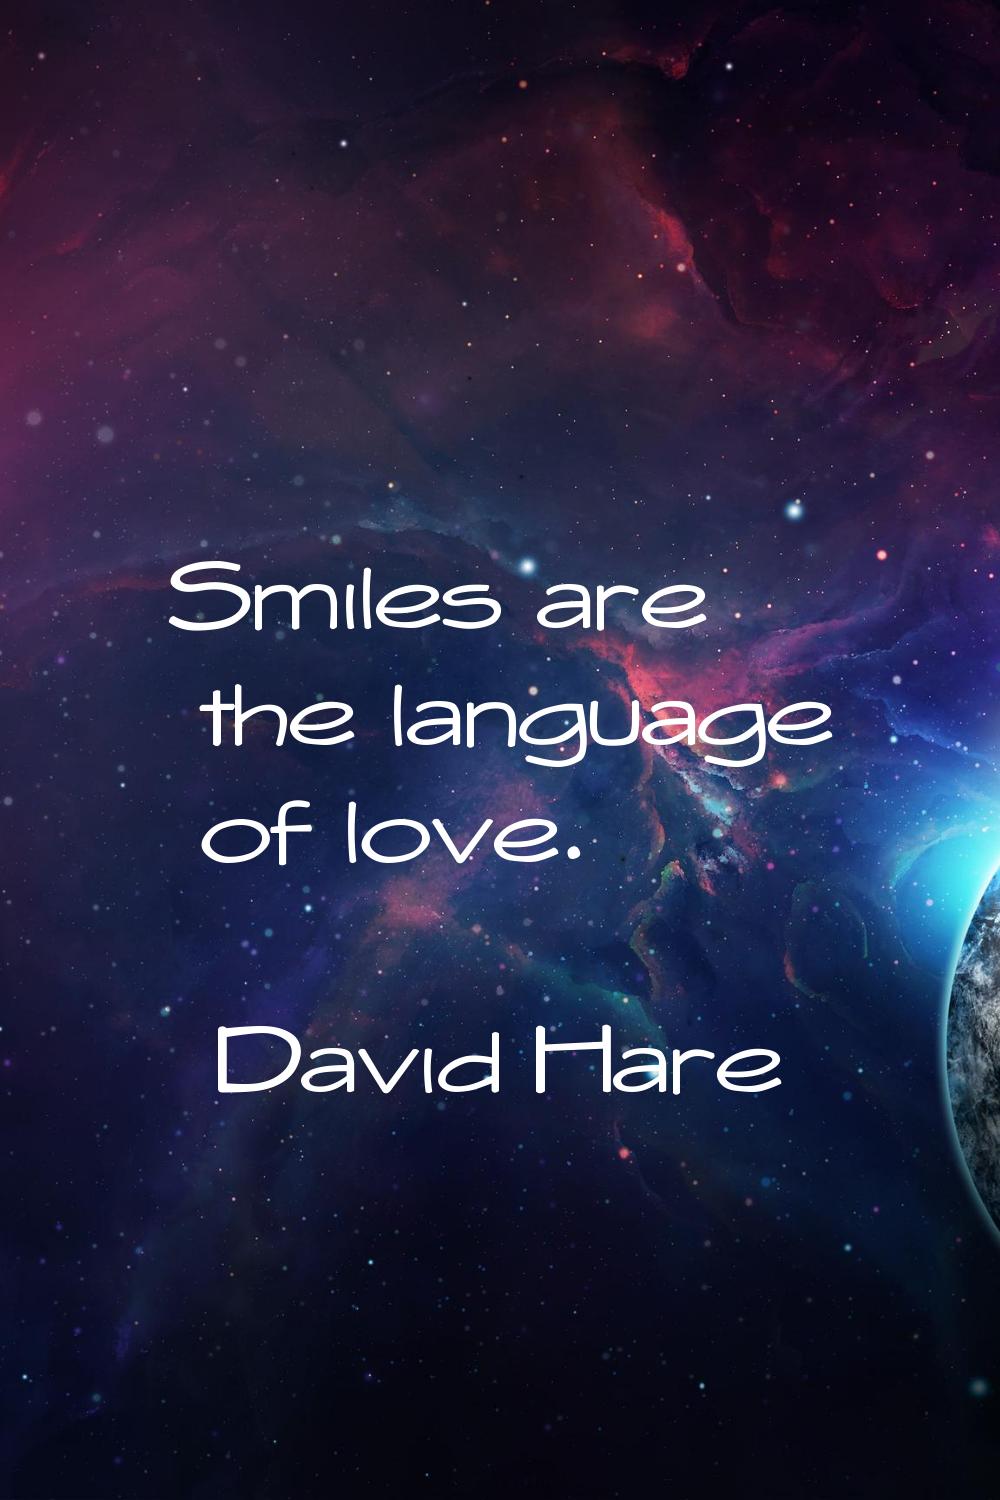 Smiles are the language of love.